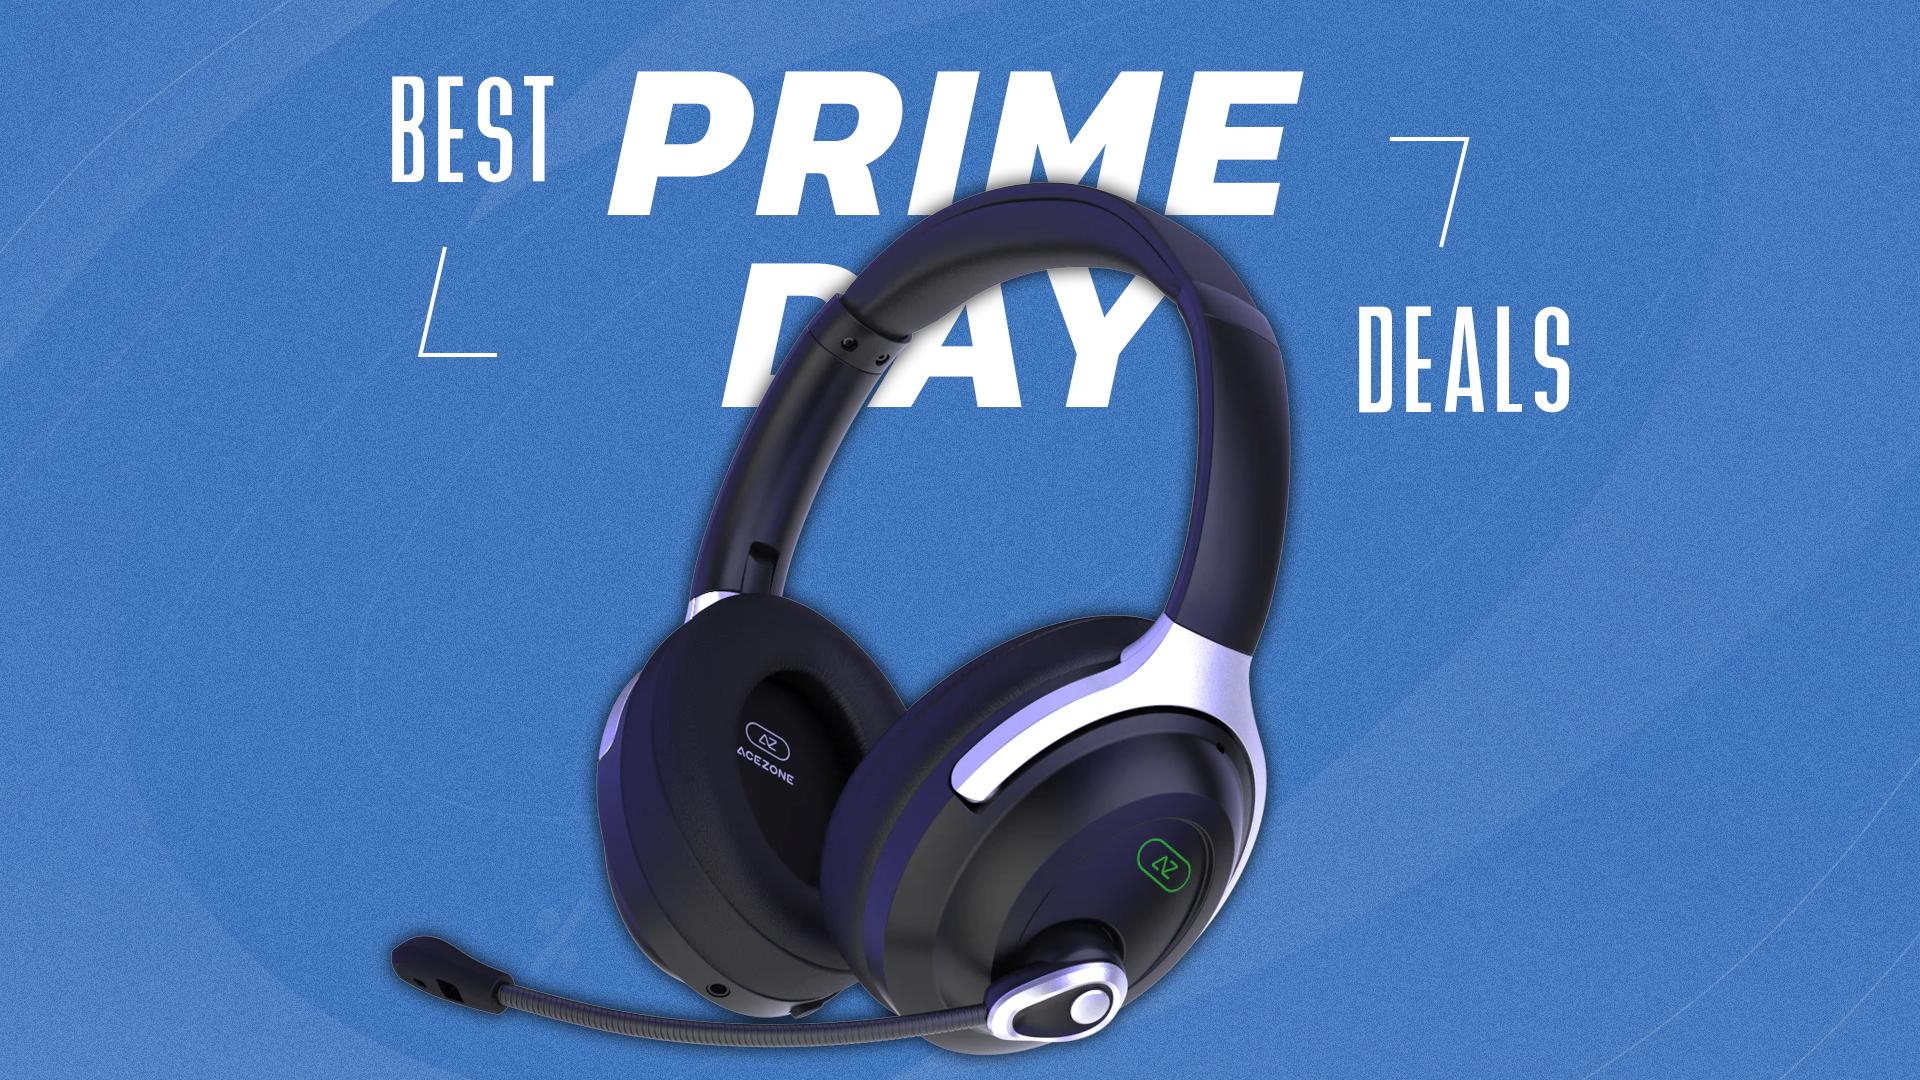 prime day deal on the acezone headset with it square in the middle of the image